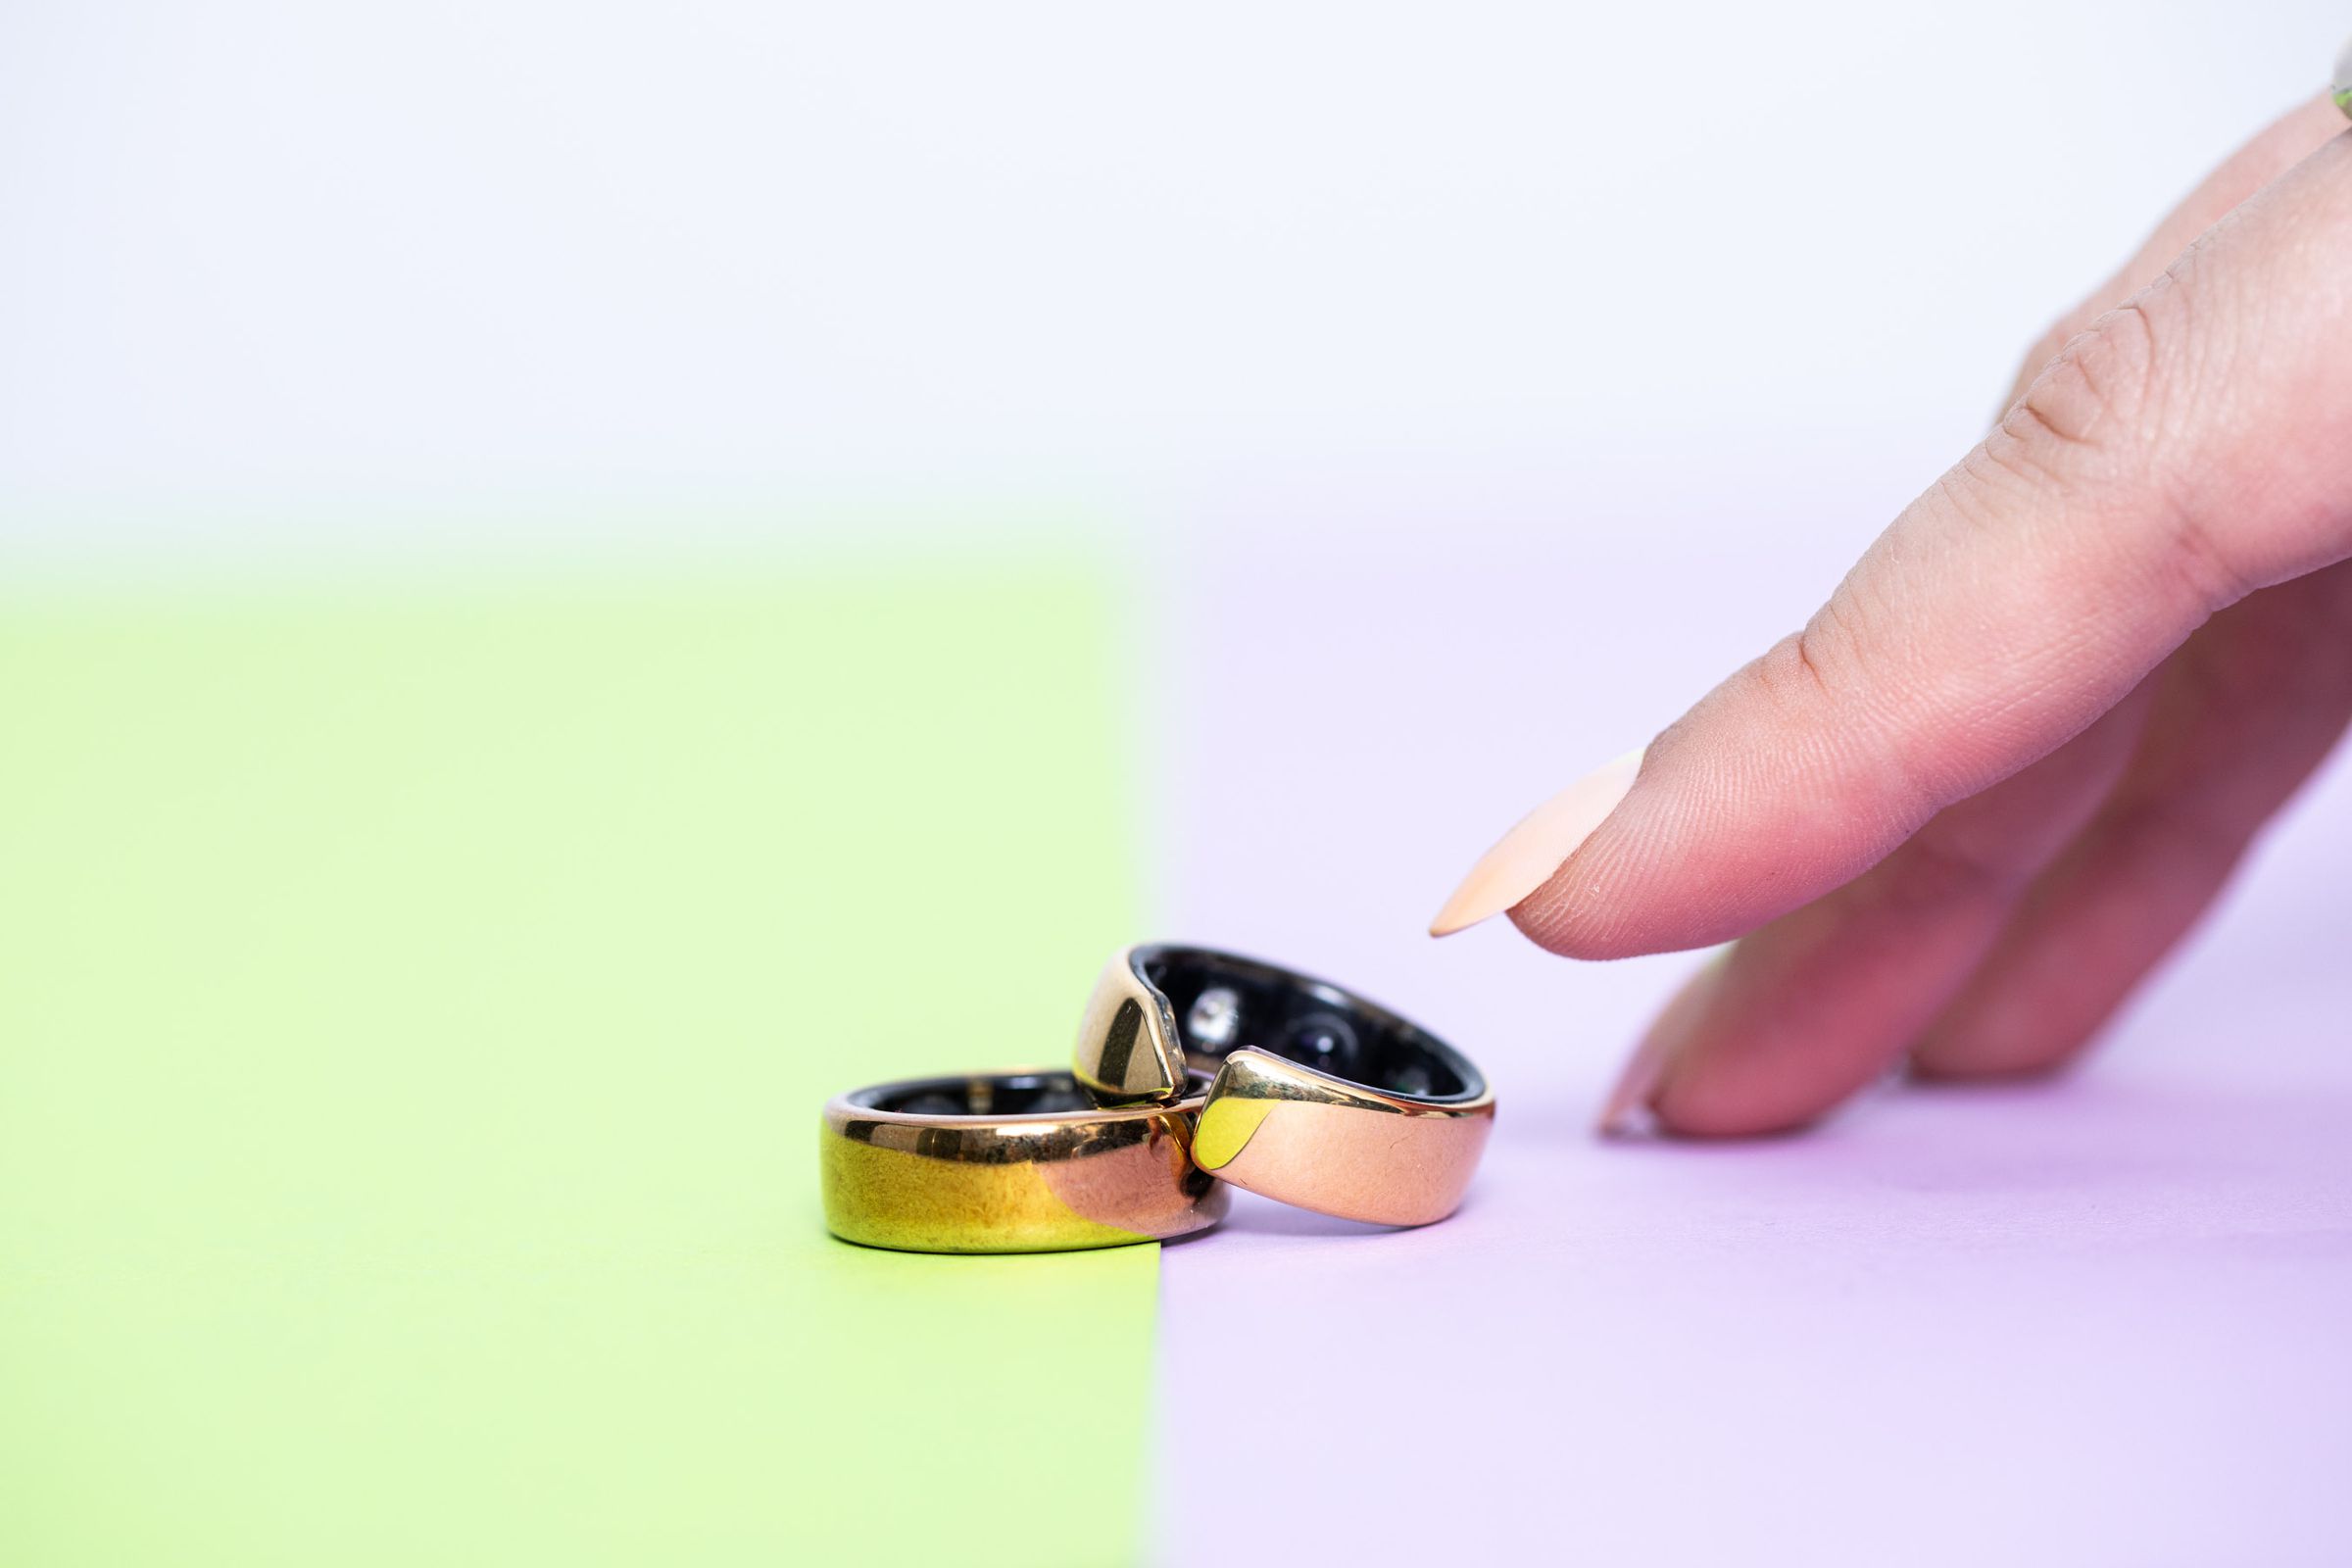 The Evie Ring on top of the Oura Ring while a hand reaches out toward them